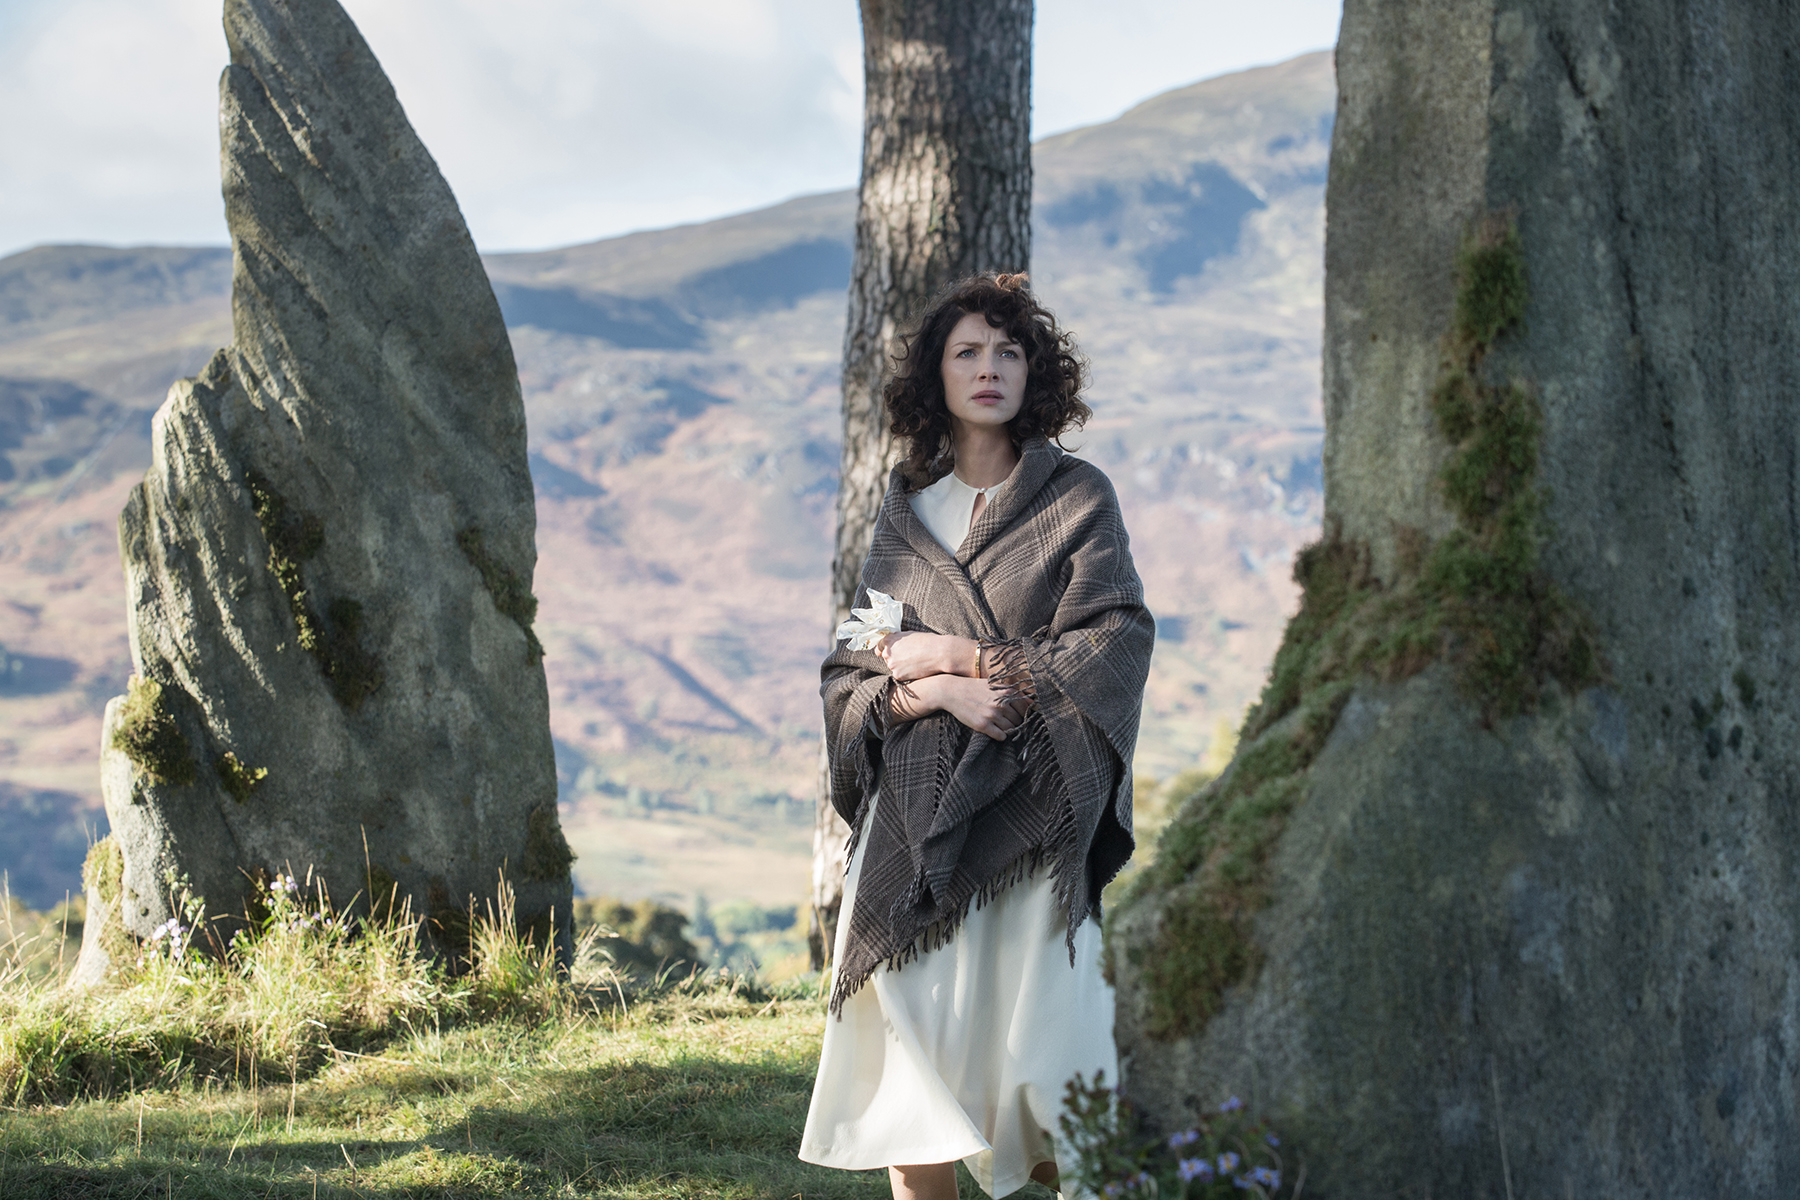 6 Beautiful Instagram Shots From the 'Outlander' Cast While Shooting Season 3